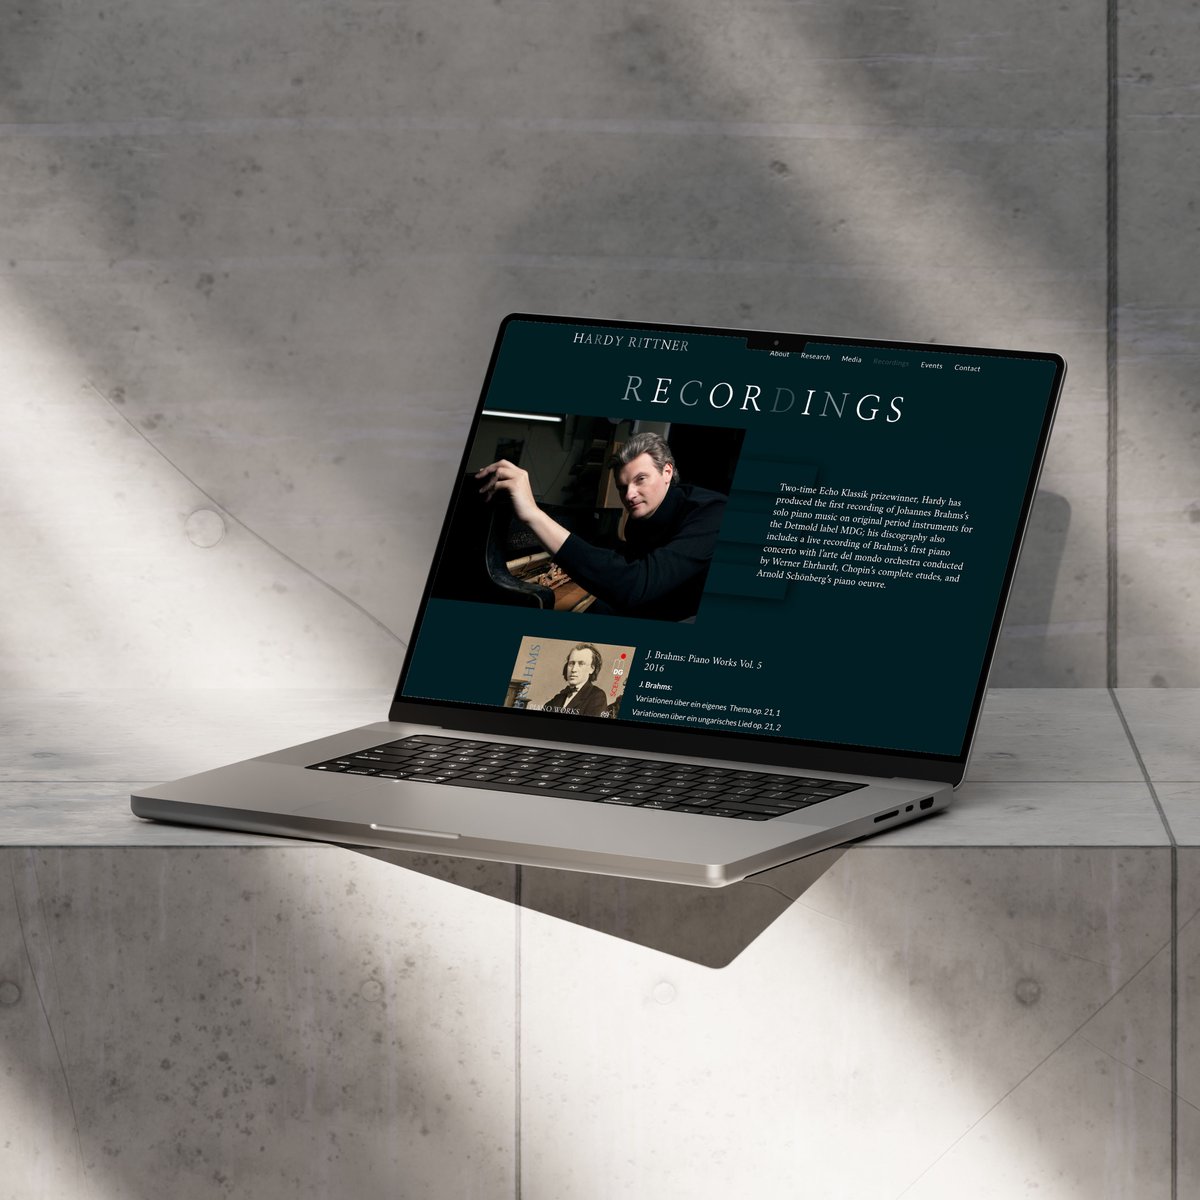 Have a look at our newly launched site design and photography for @Baerenreiter artist & pianist, Hardy Rittner. See the new website here 📷 hardyrittner.com @KeynoteAM